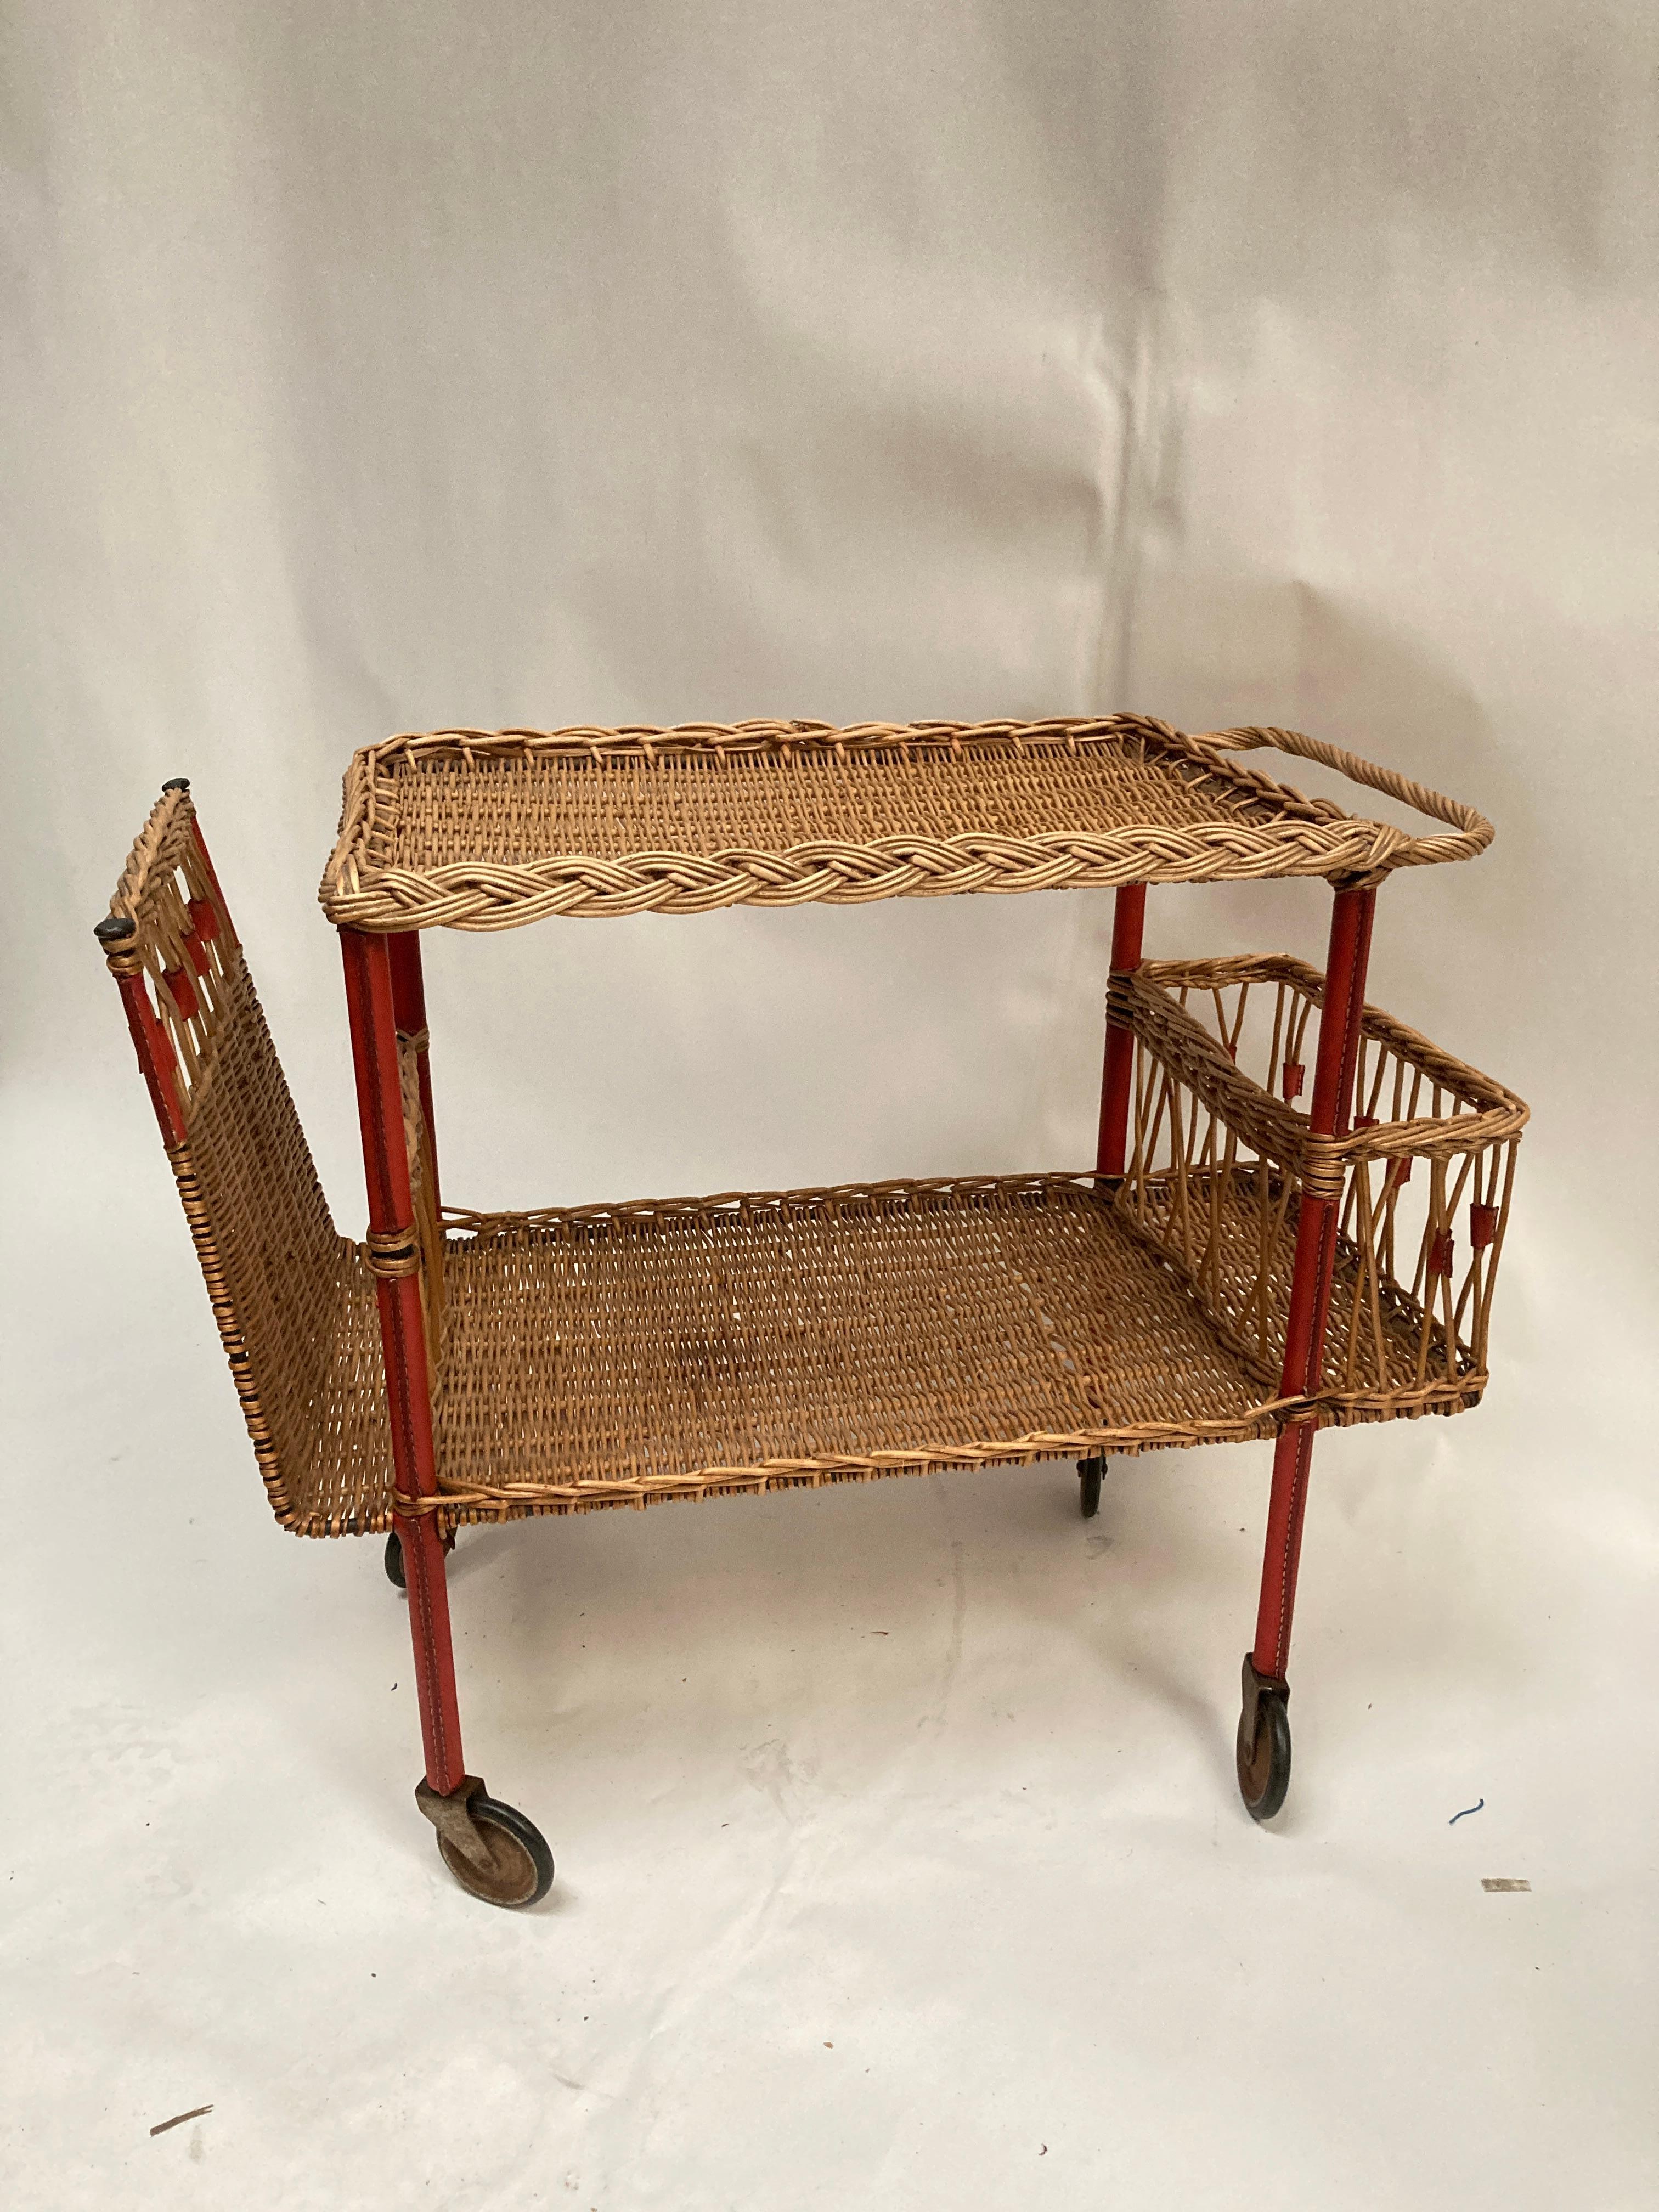 1950's Stitched leather and rattan bar cart by Jacques Adnet
Rare in red
Good condition
